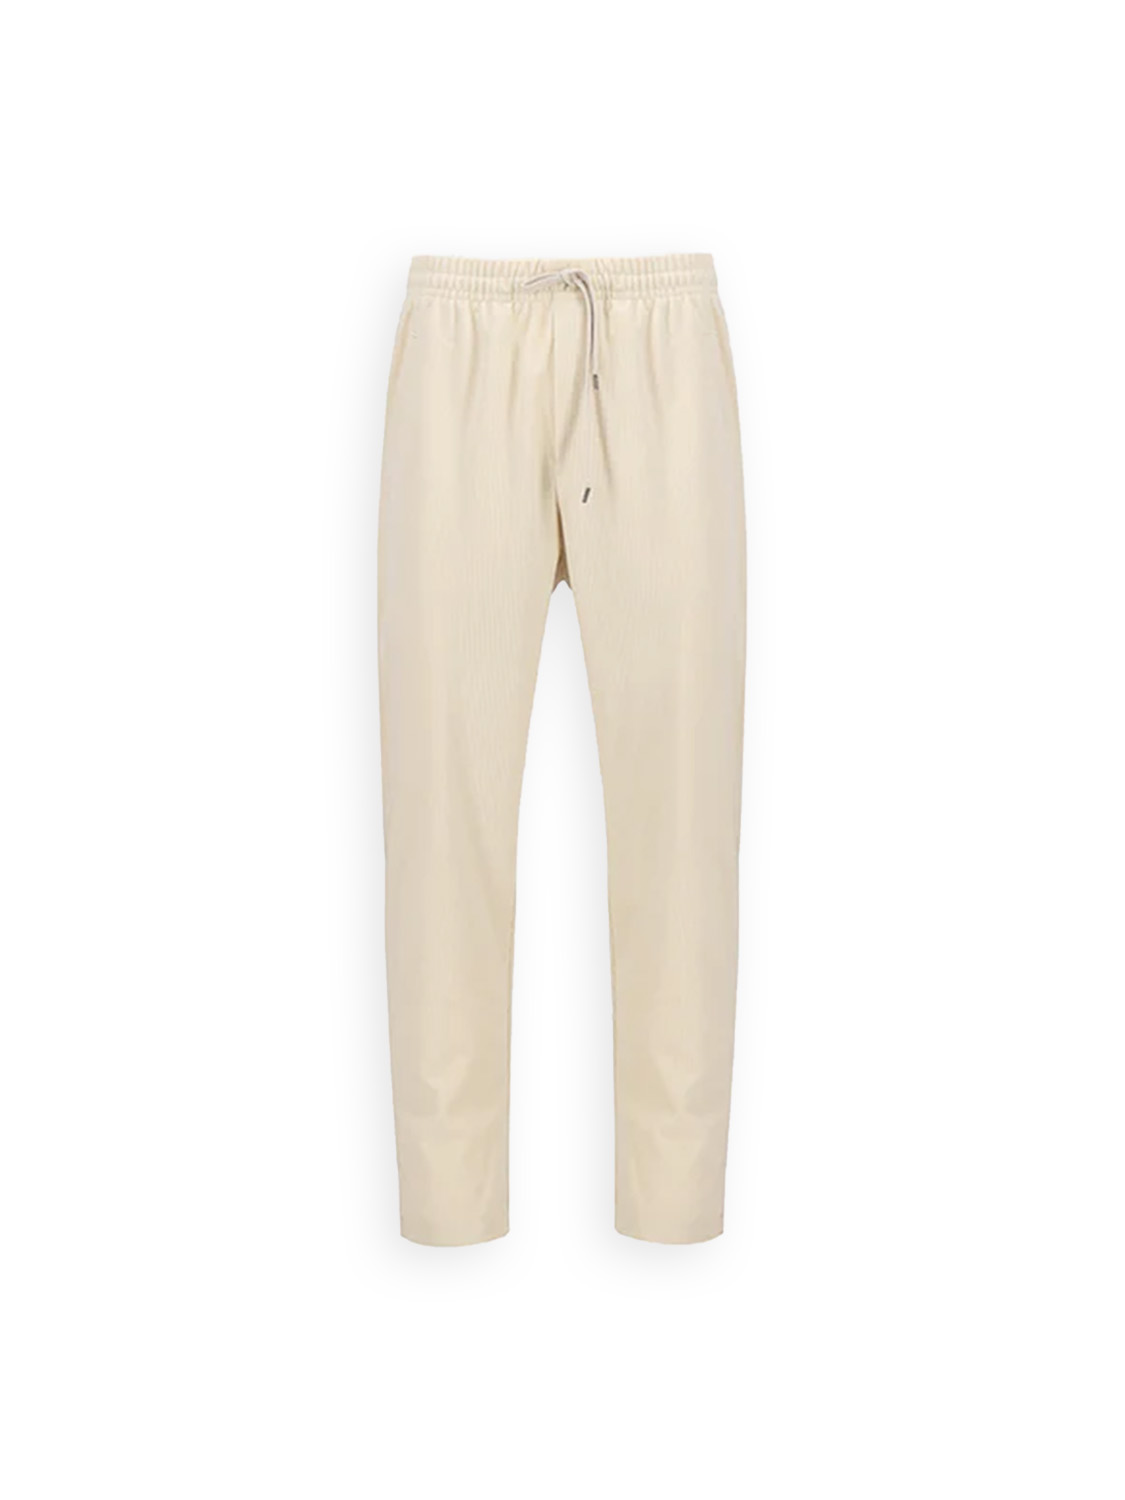 Jogging twill - cotton trousers in jogging style